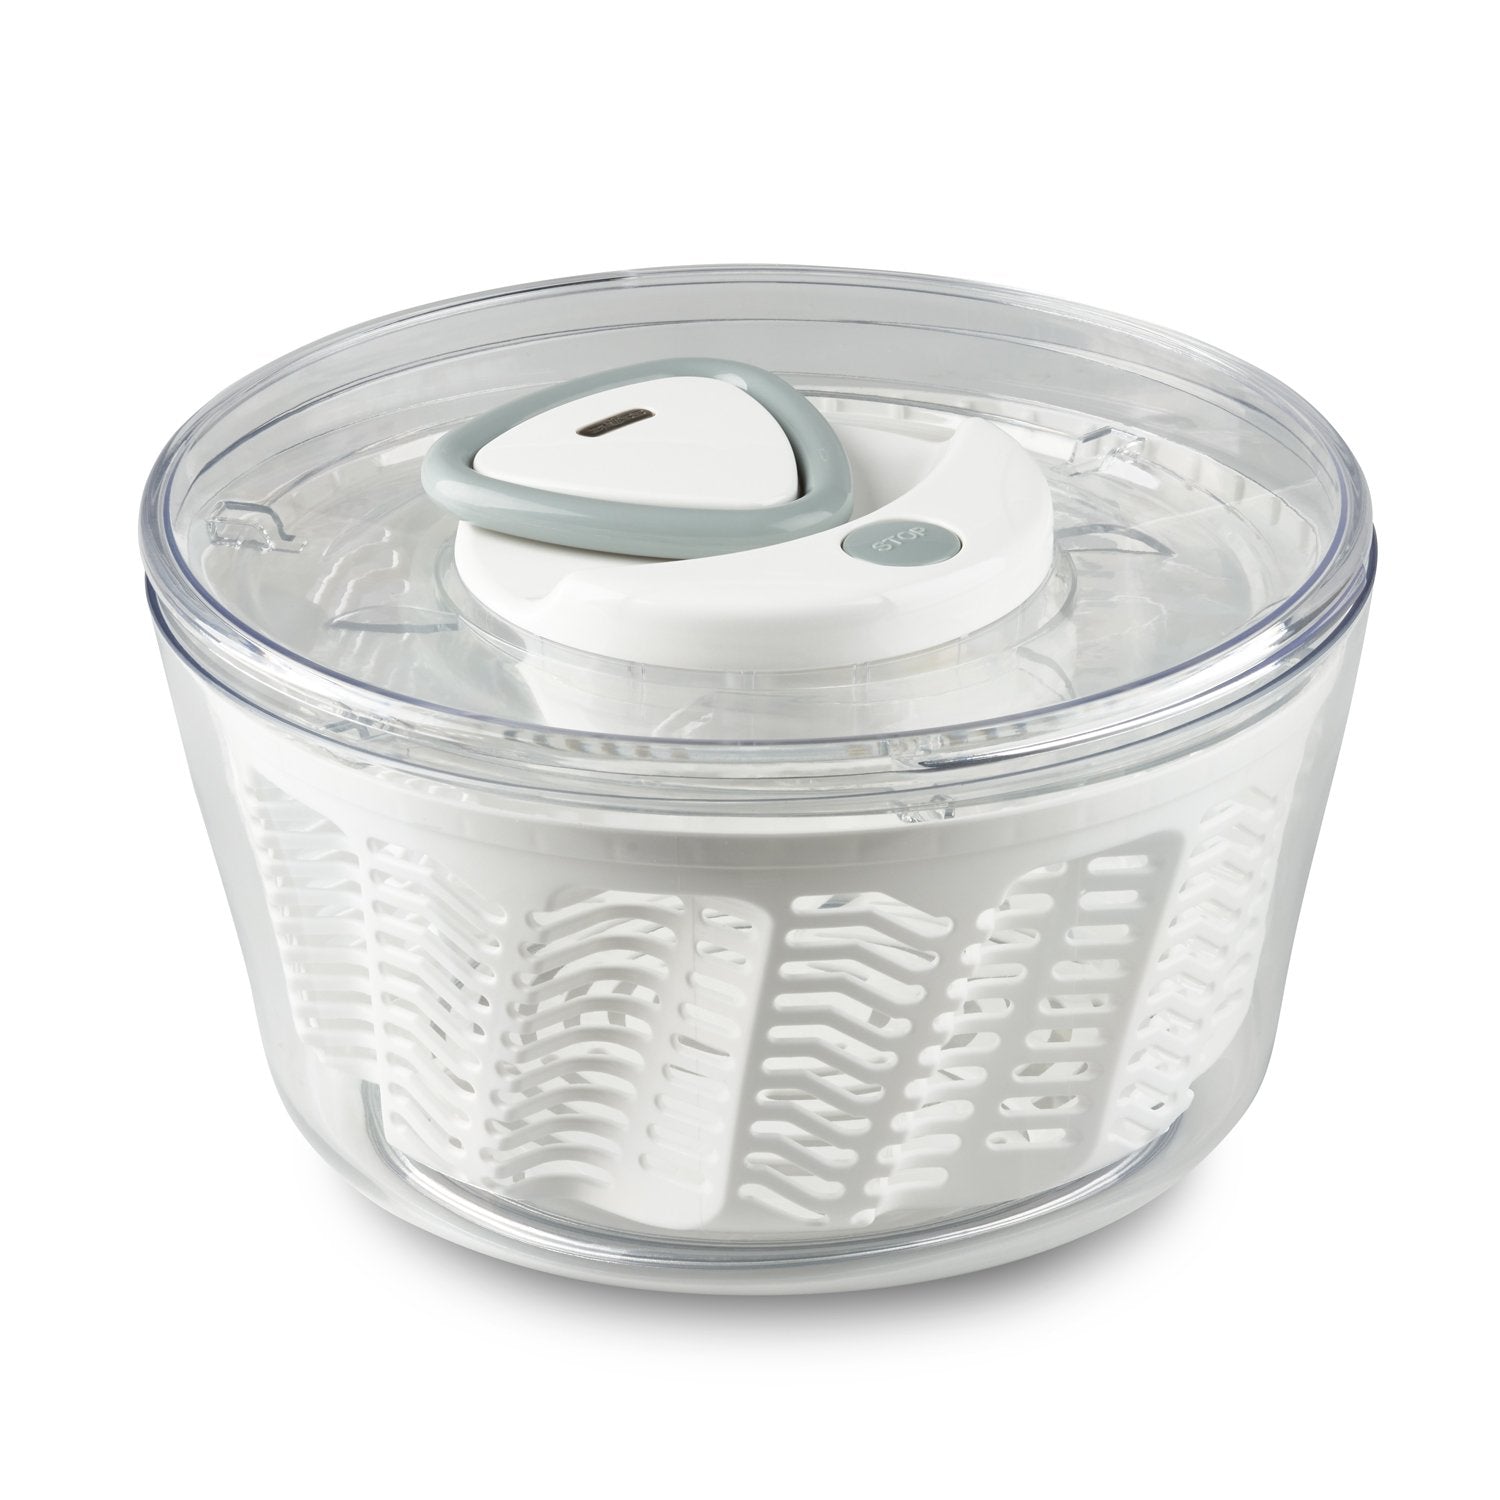 Zyliss Easy Spin Salad Spinner